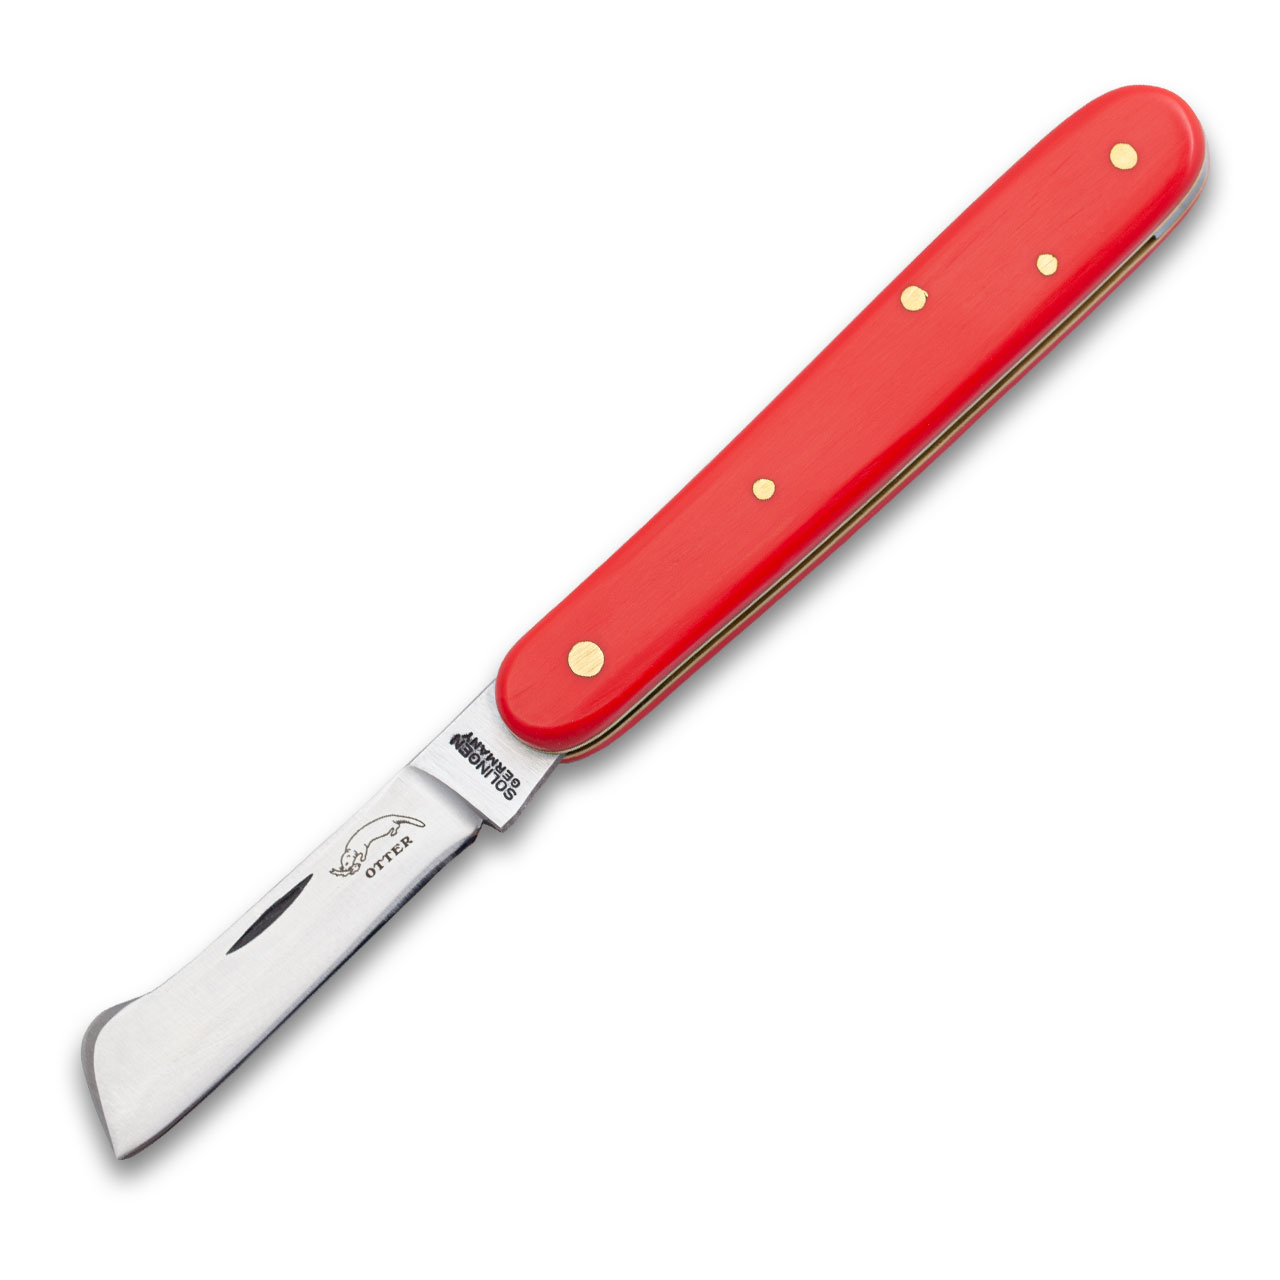 OTTER Budding knife with blade remover 123